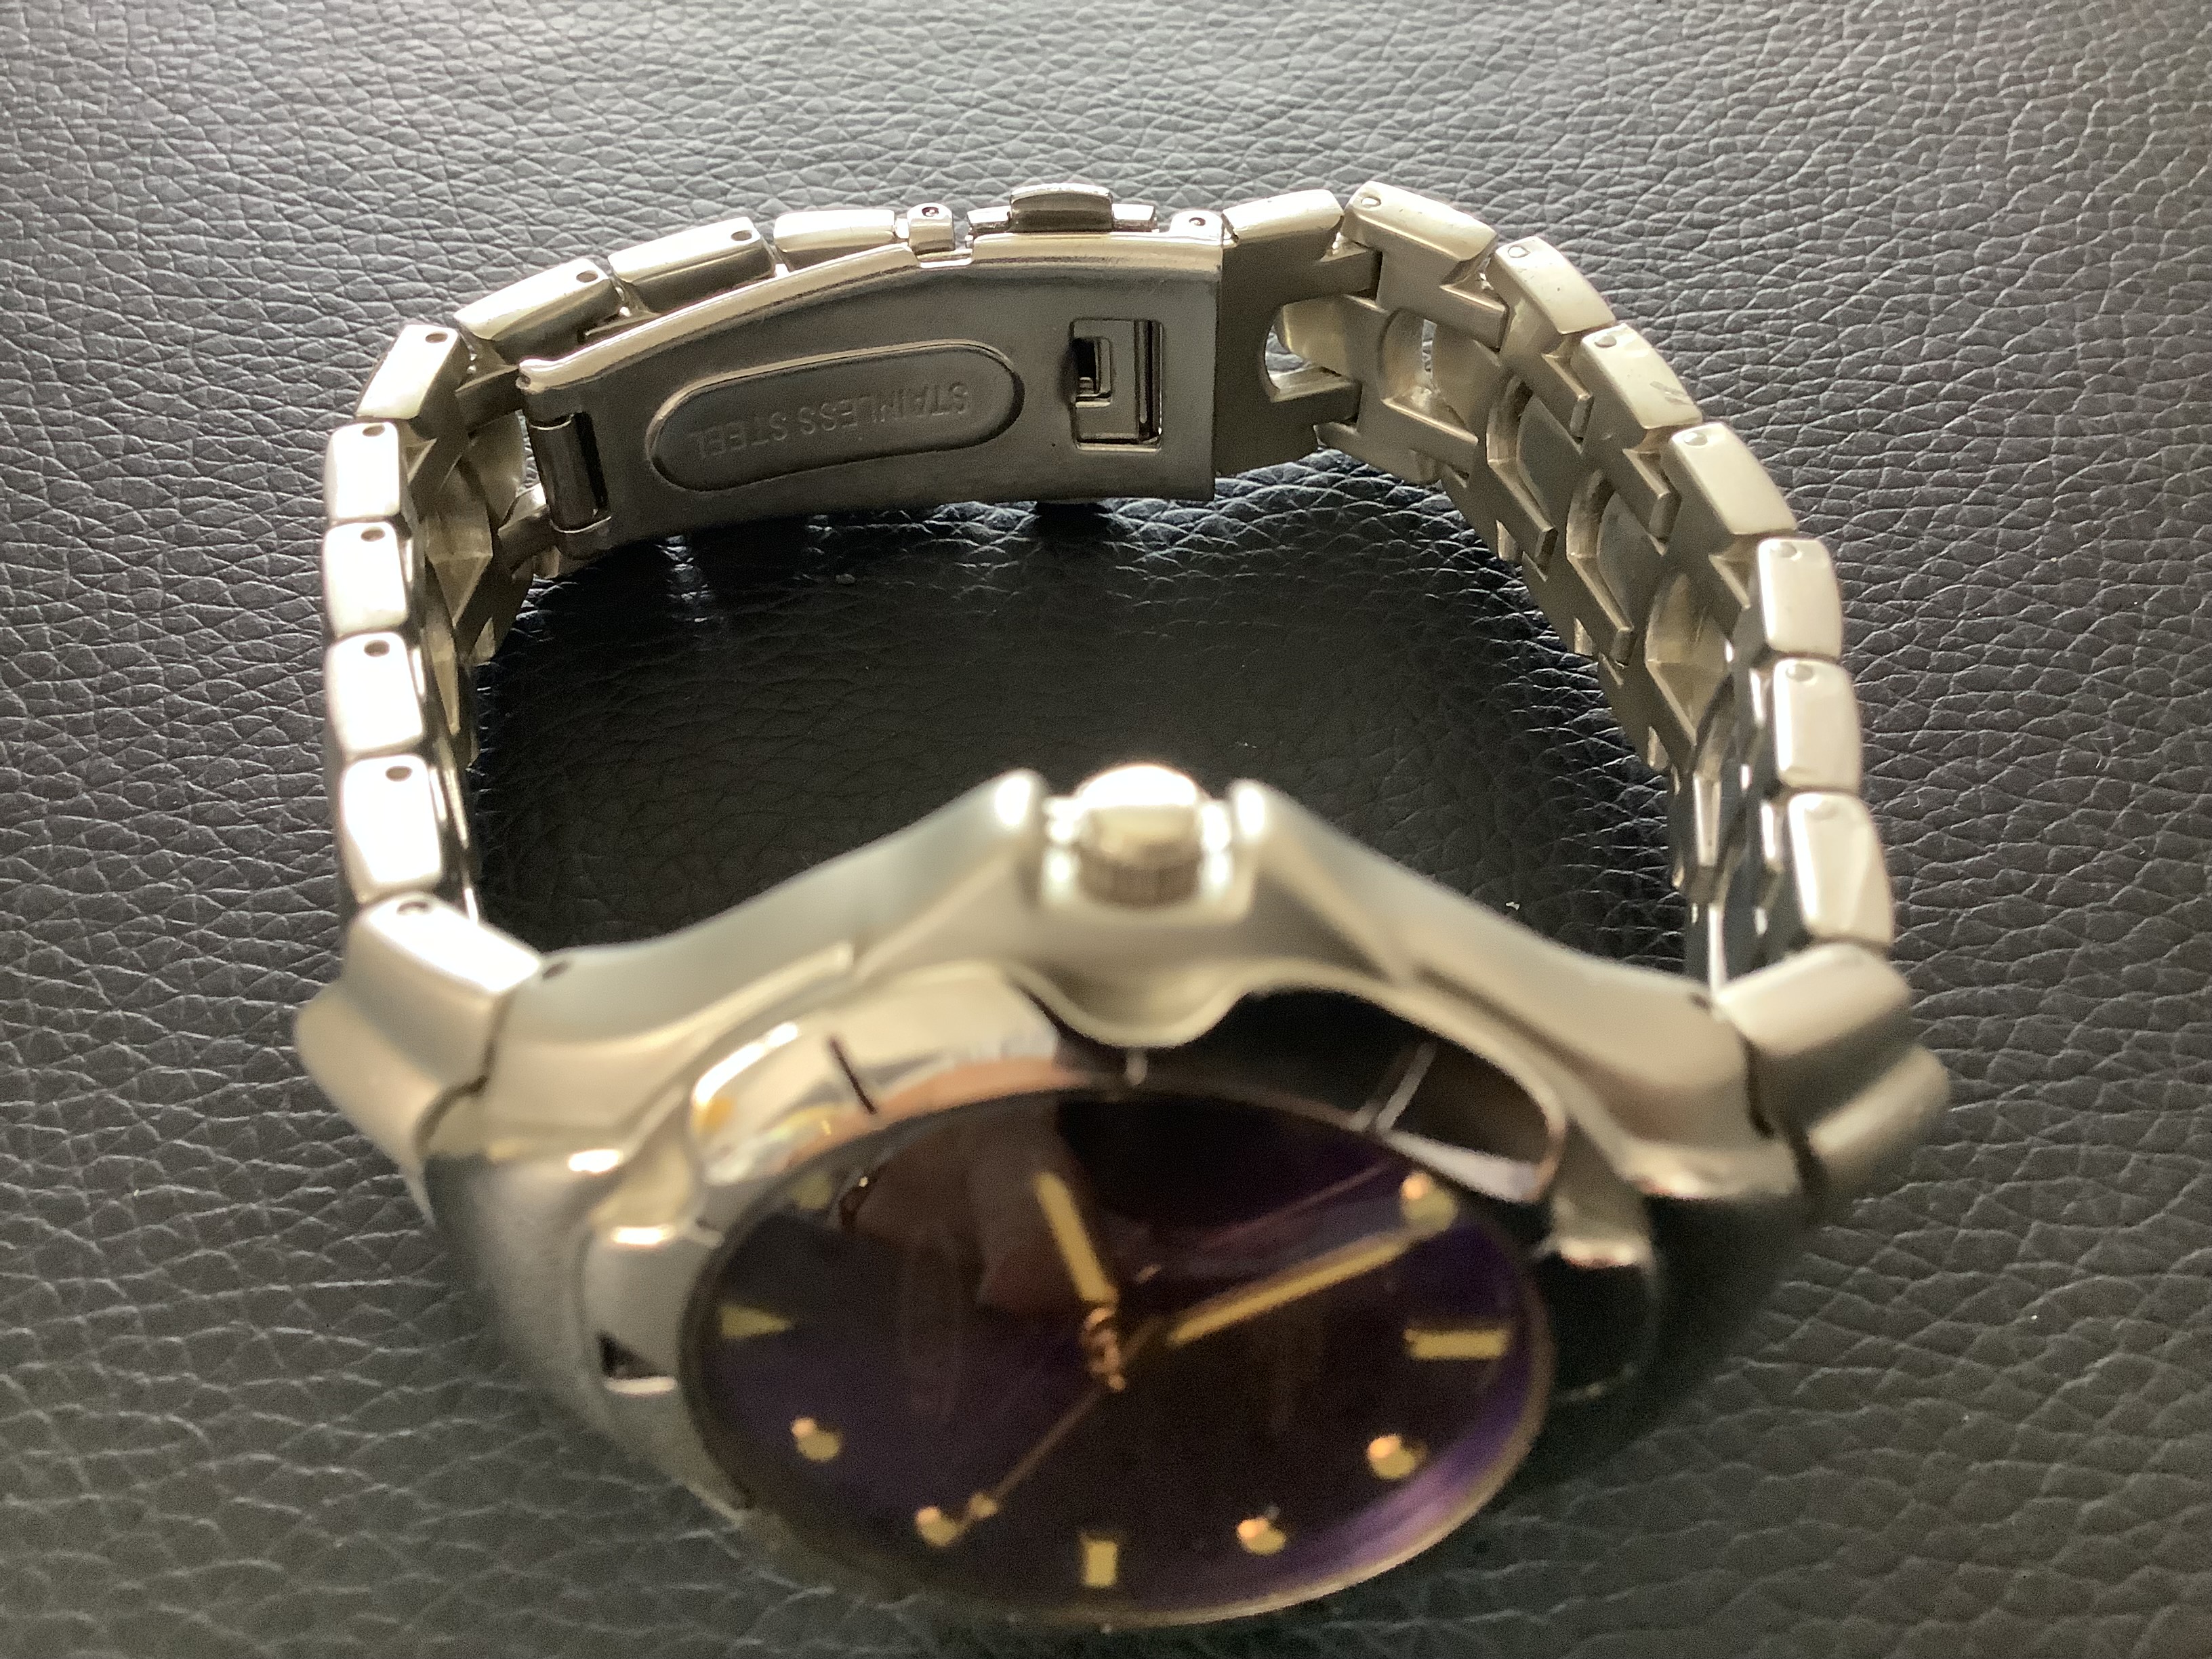 Polo Max Unisex 'As New' Wristwatch with mirror effect Face (GS 145) - Image 3 of 6